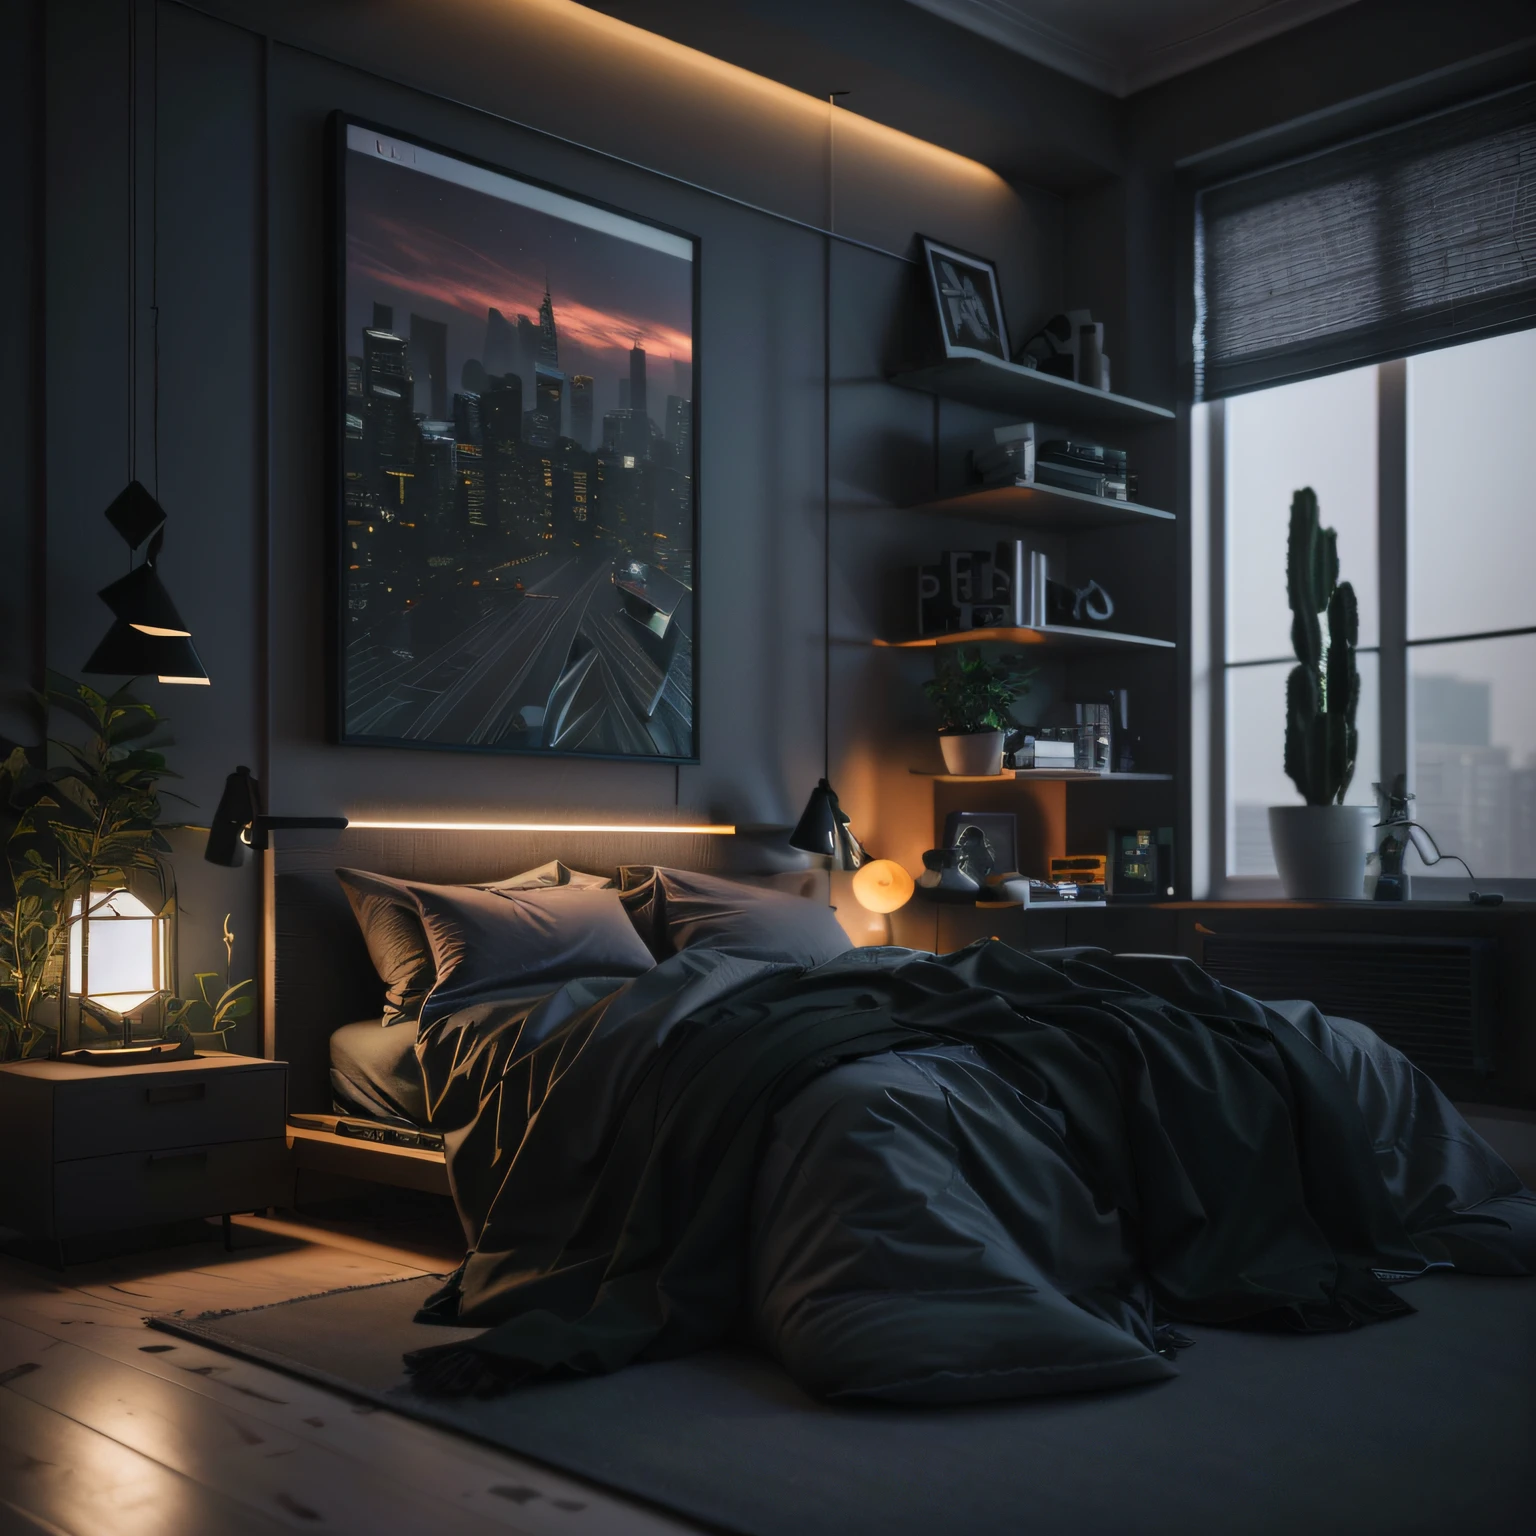 There is a bed with a blanket and a lamp in one room, Cyberpunk Room at Night, dark bedroom, dimly lit bedroom, night time render, cyberpunk teenage room, dramatic lighting render, sensual 8K lighting, cinematic mood lighting, 3 d render bipe, cyberpunk apartment, photorealistic room, dark bedroom, mysterious ambient lighting, low light room